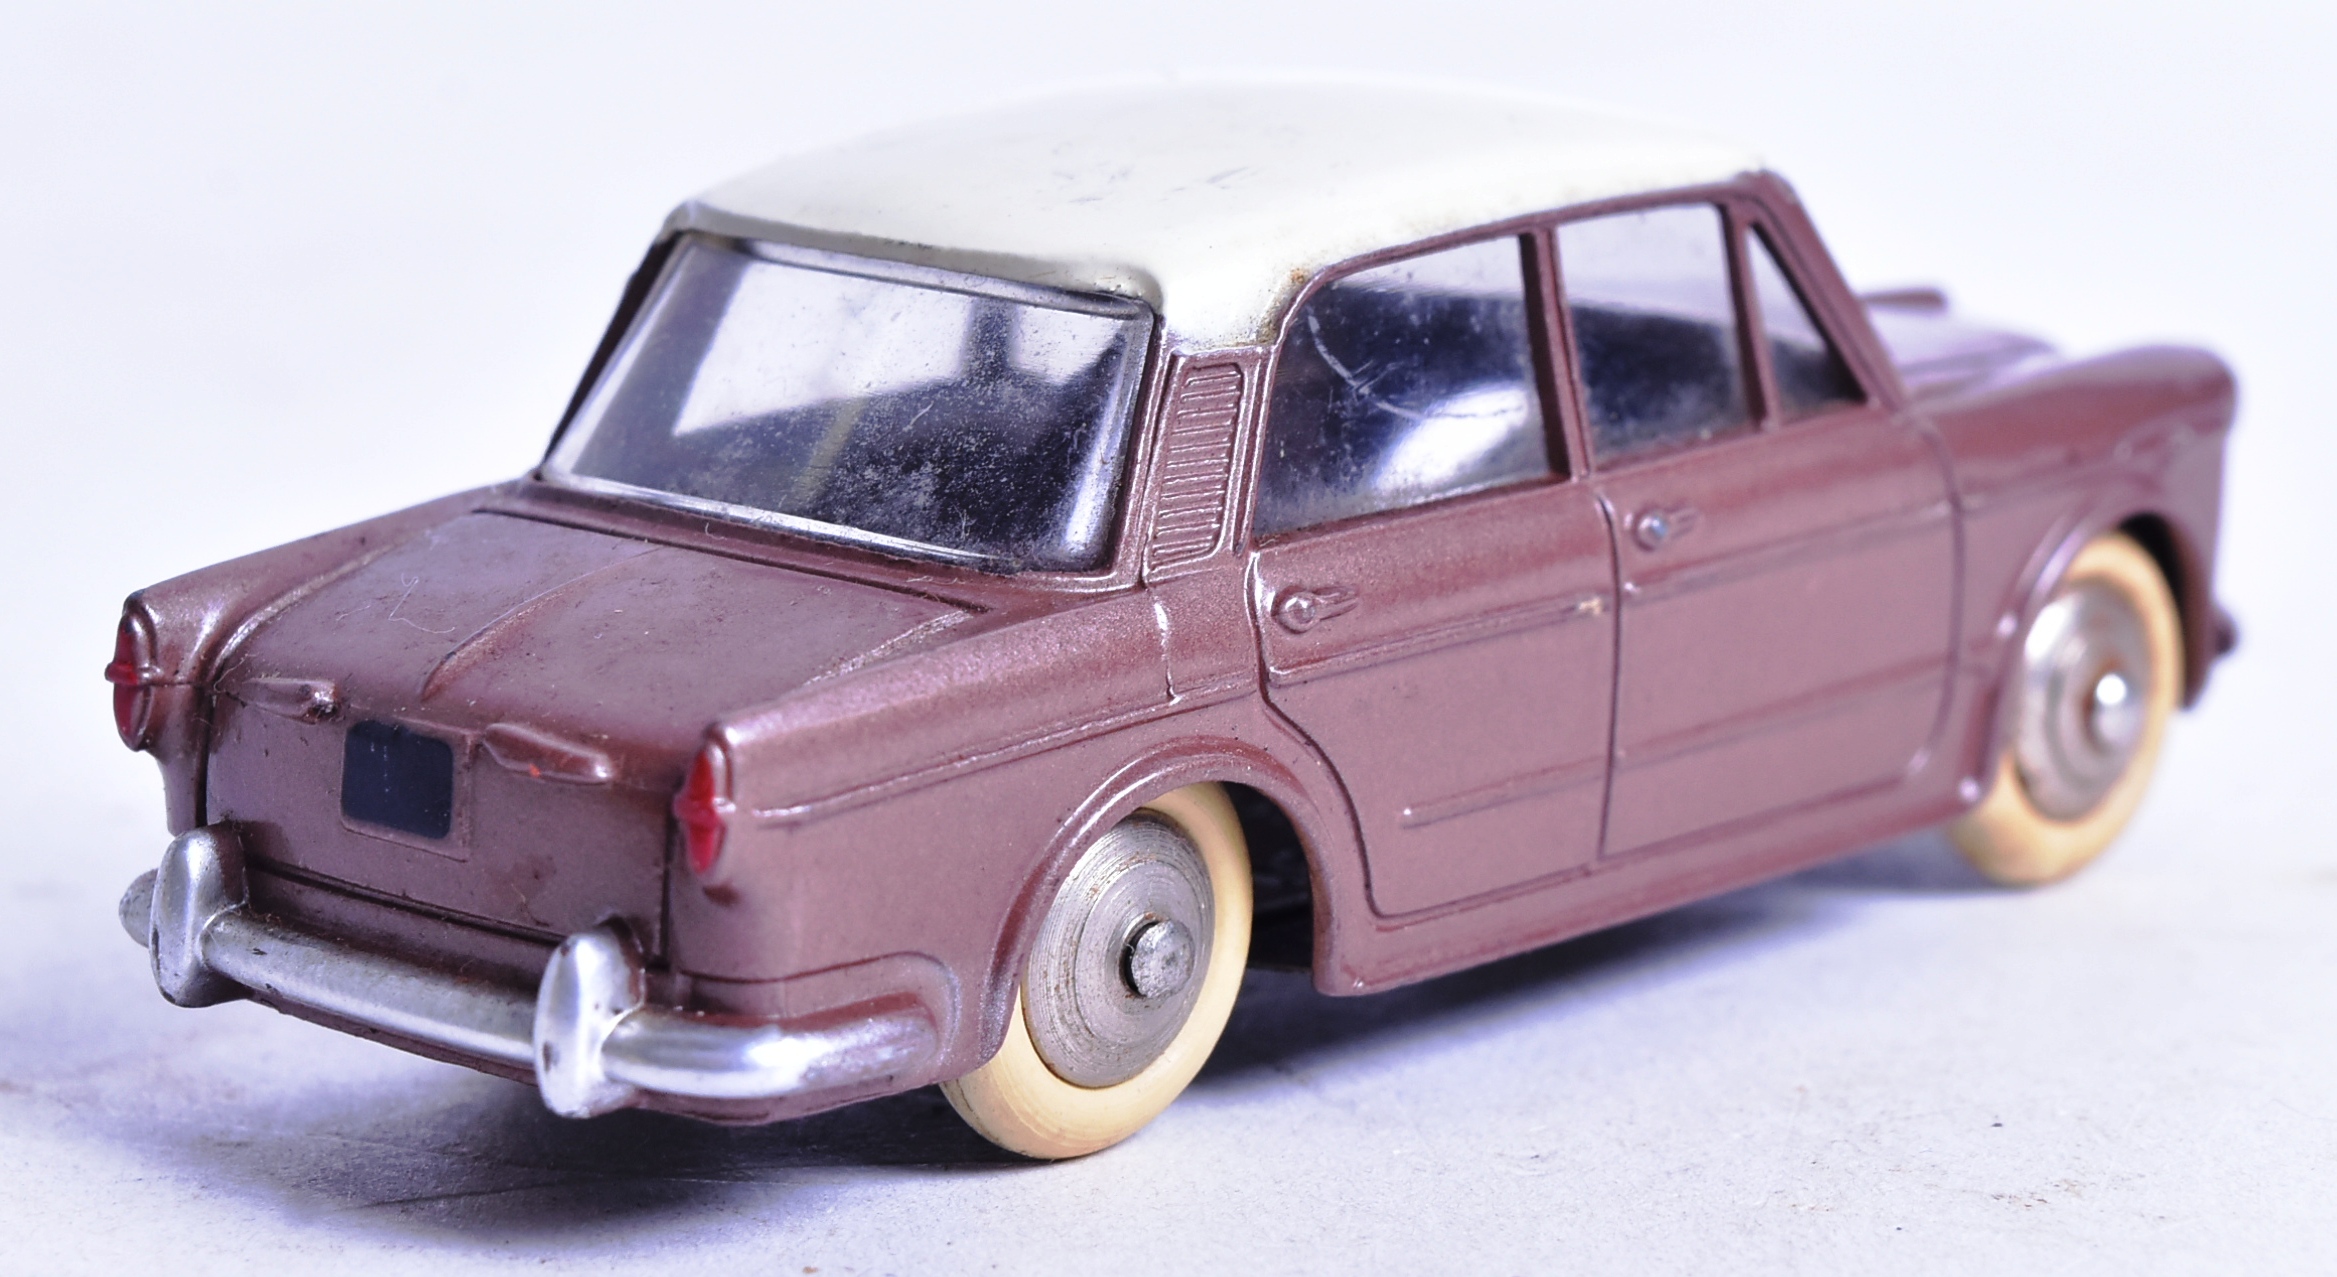 DIECAST - FRENCH DINKY TOYS - GRANDE VUE FIAT 1200 - Image 4 of 5